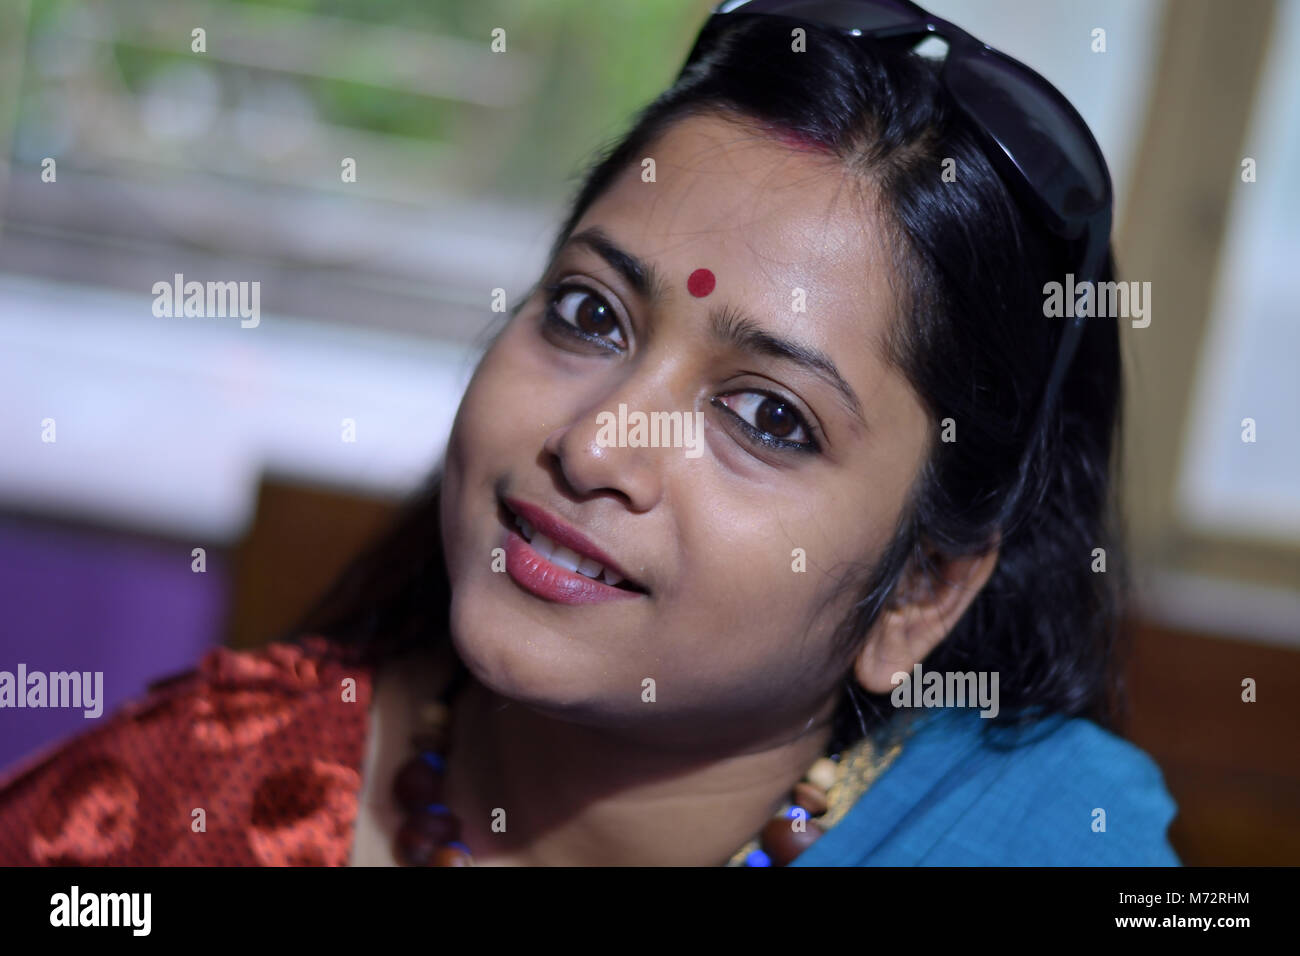 beautiful bengali lady is looking straight with a smile inside the room. Stock Photo